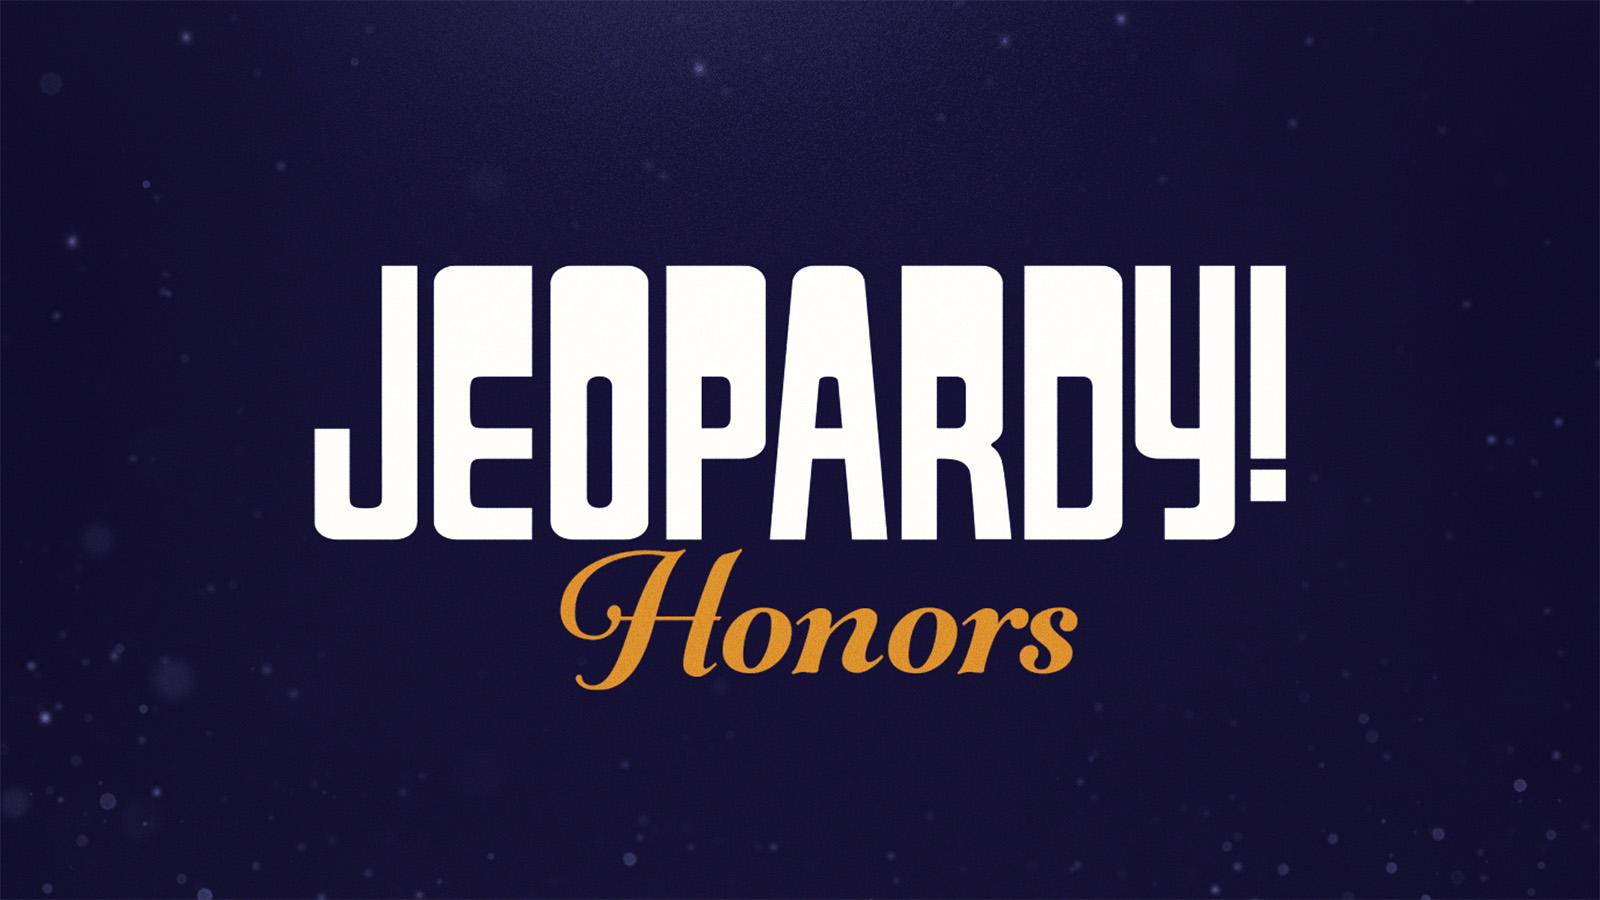 Jeopardy! Honors